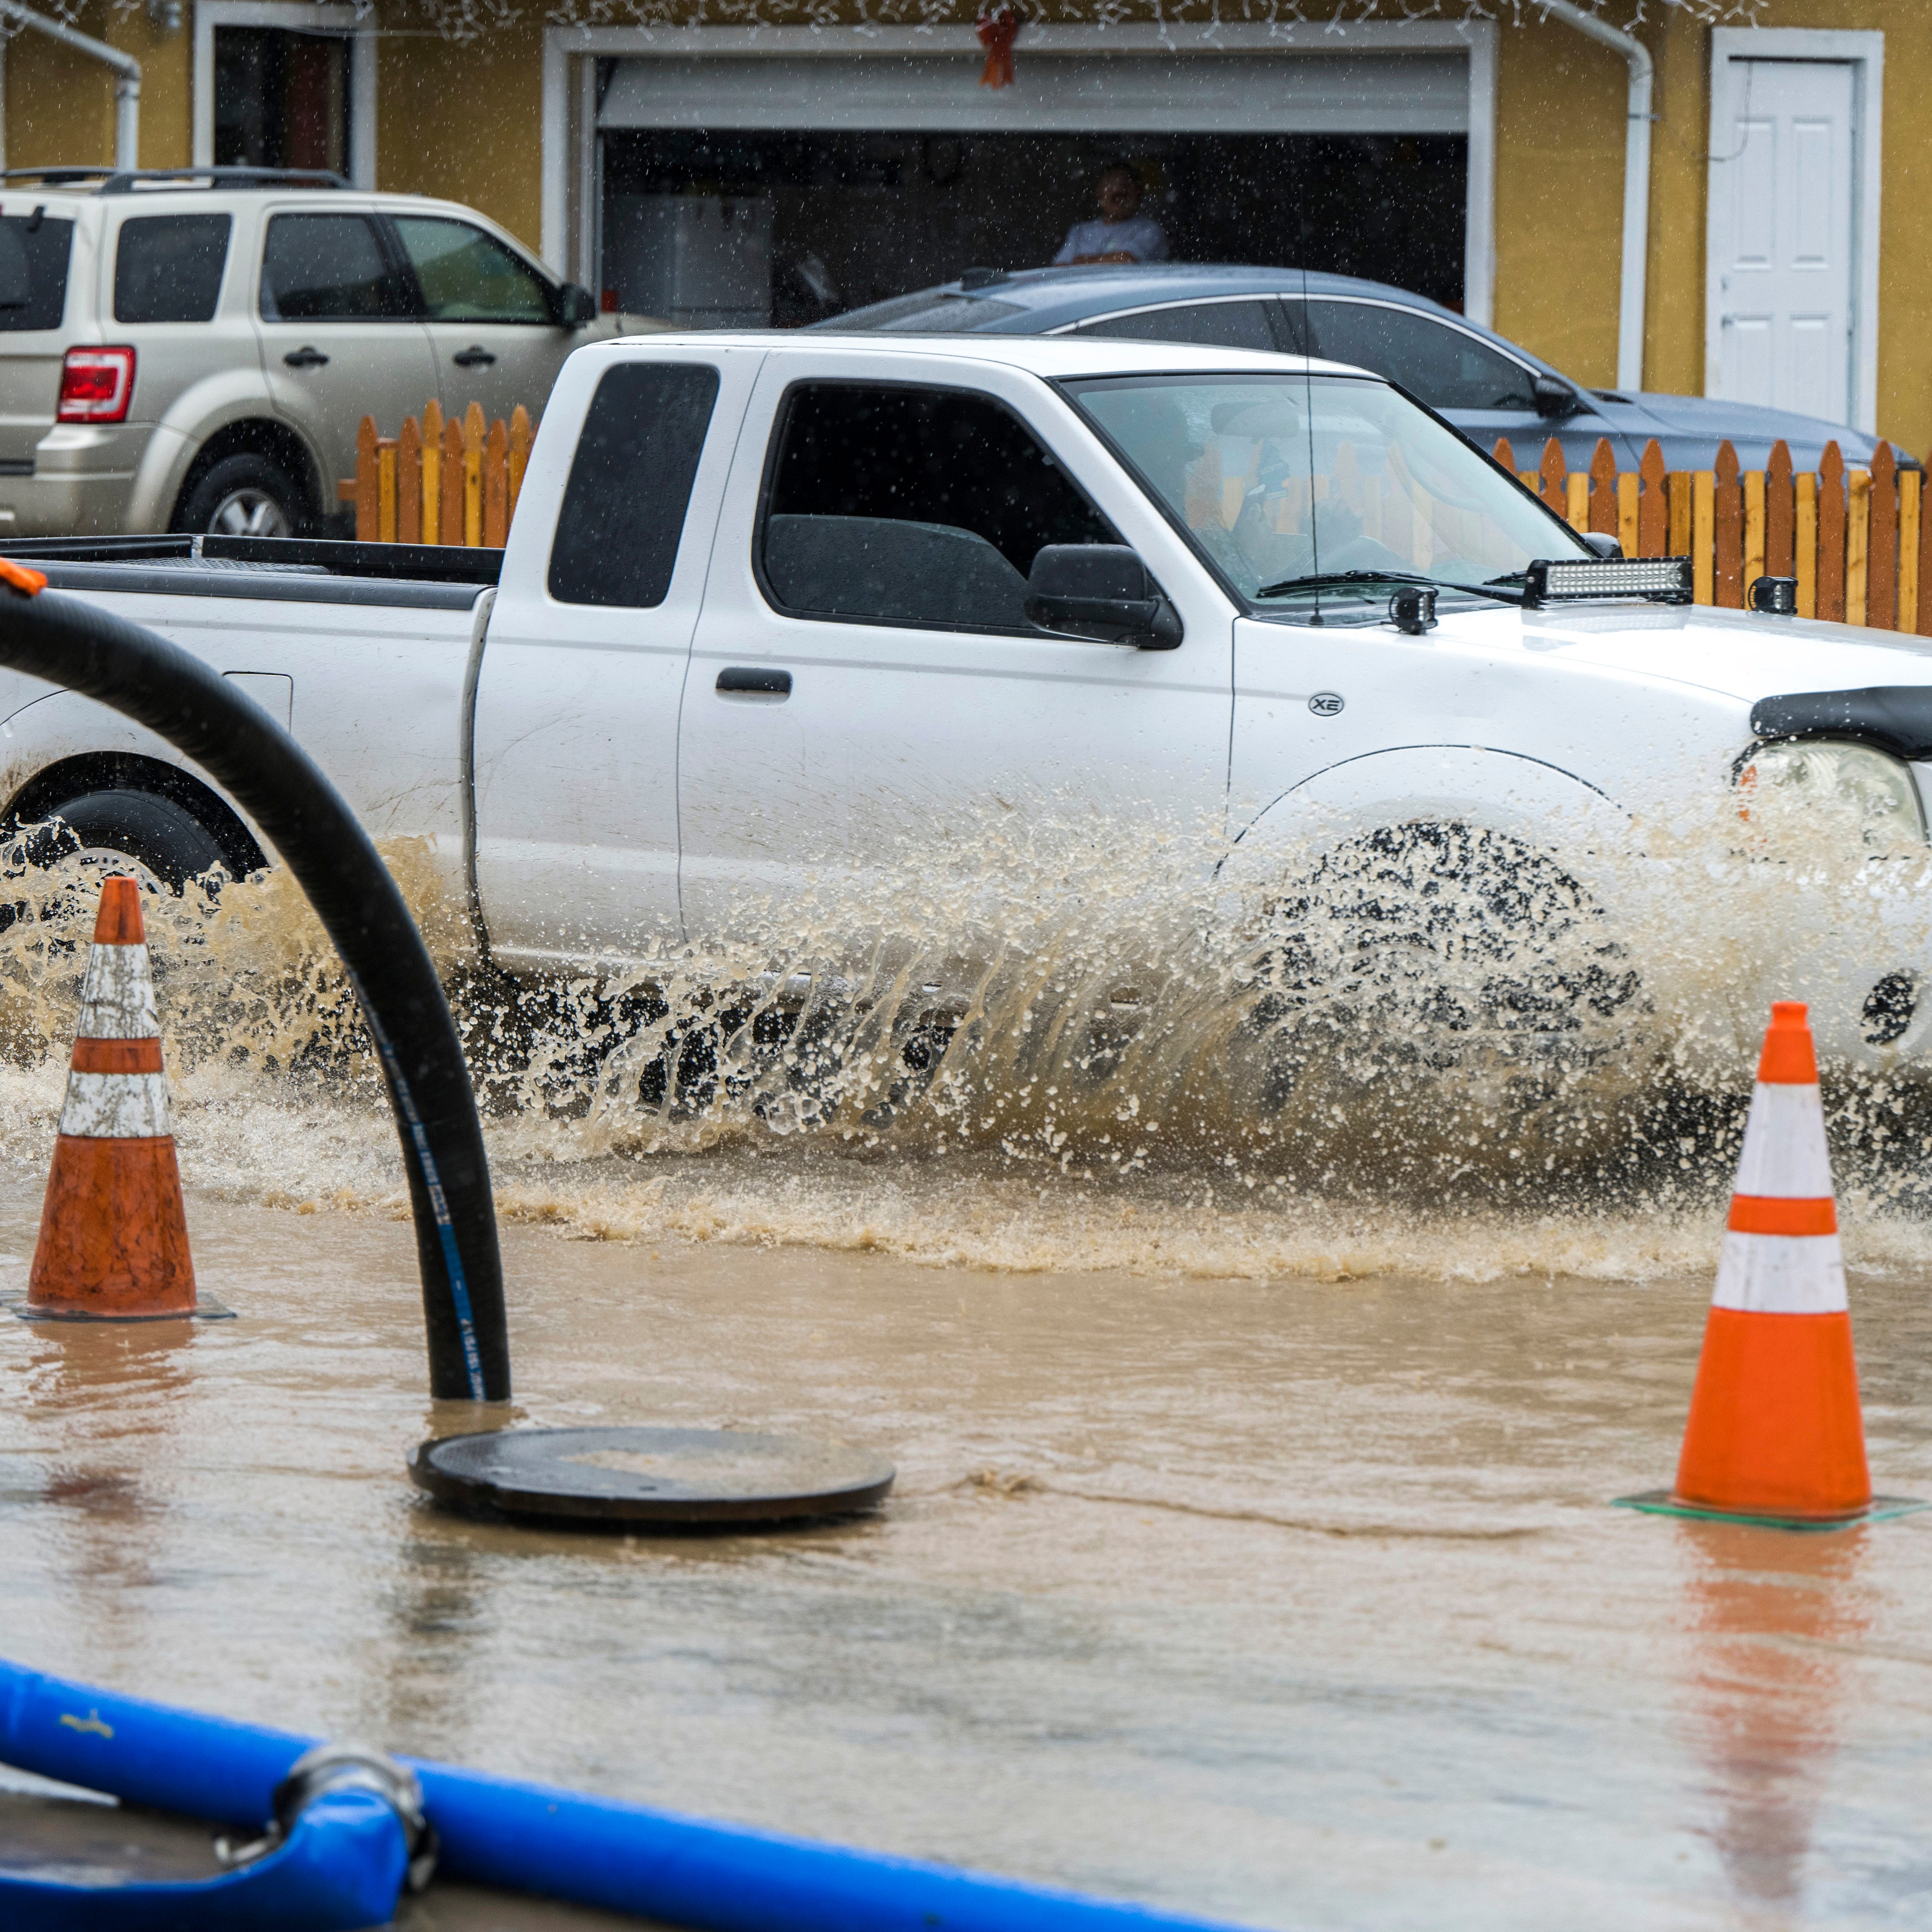 A member of public works clears a flooded storm drain on E Bolivar Street in Salinas, Calif., Tuesday, Dec. 27, 2022. The first in a week of storms brought gusty winds, rain and snow to California on Tuesday, starting in the north and spreading southward.  (AP Photo/Nic Coury)